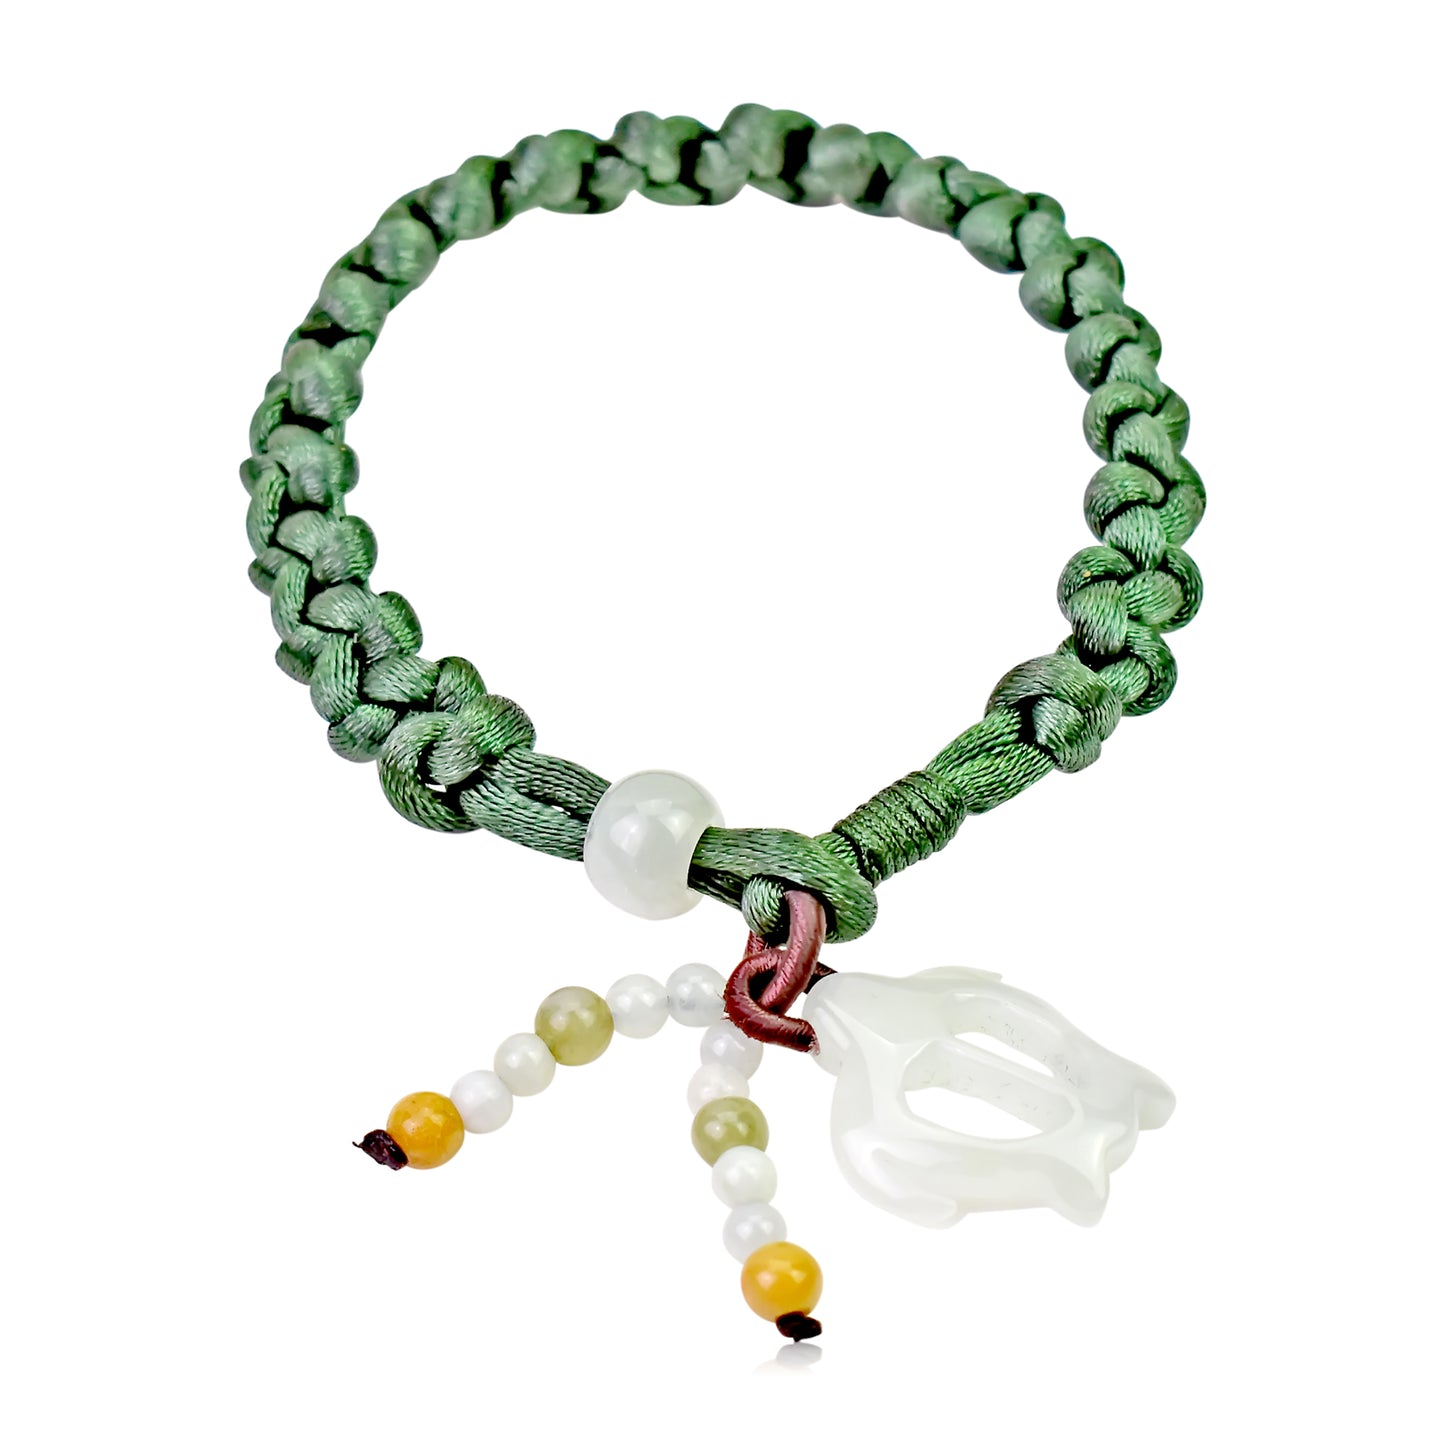 Look and Feel Calm and Protected with the Turtle Jade Bracelet made with Green Cord